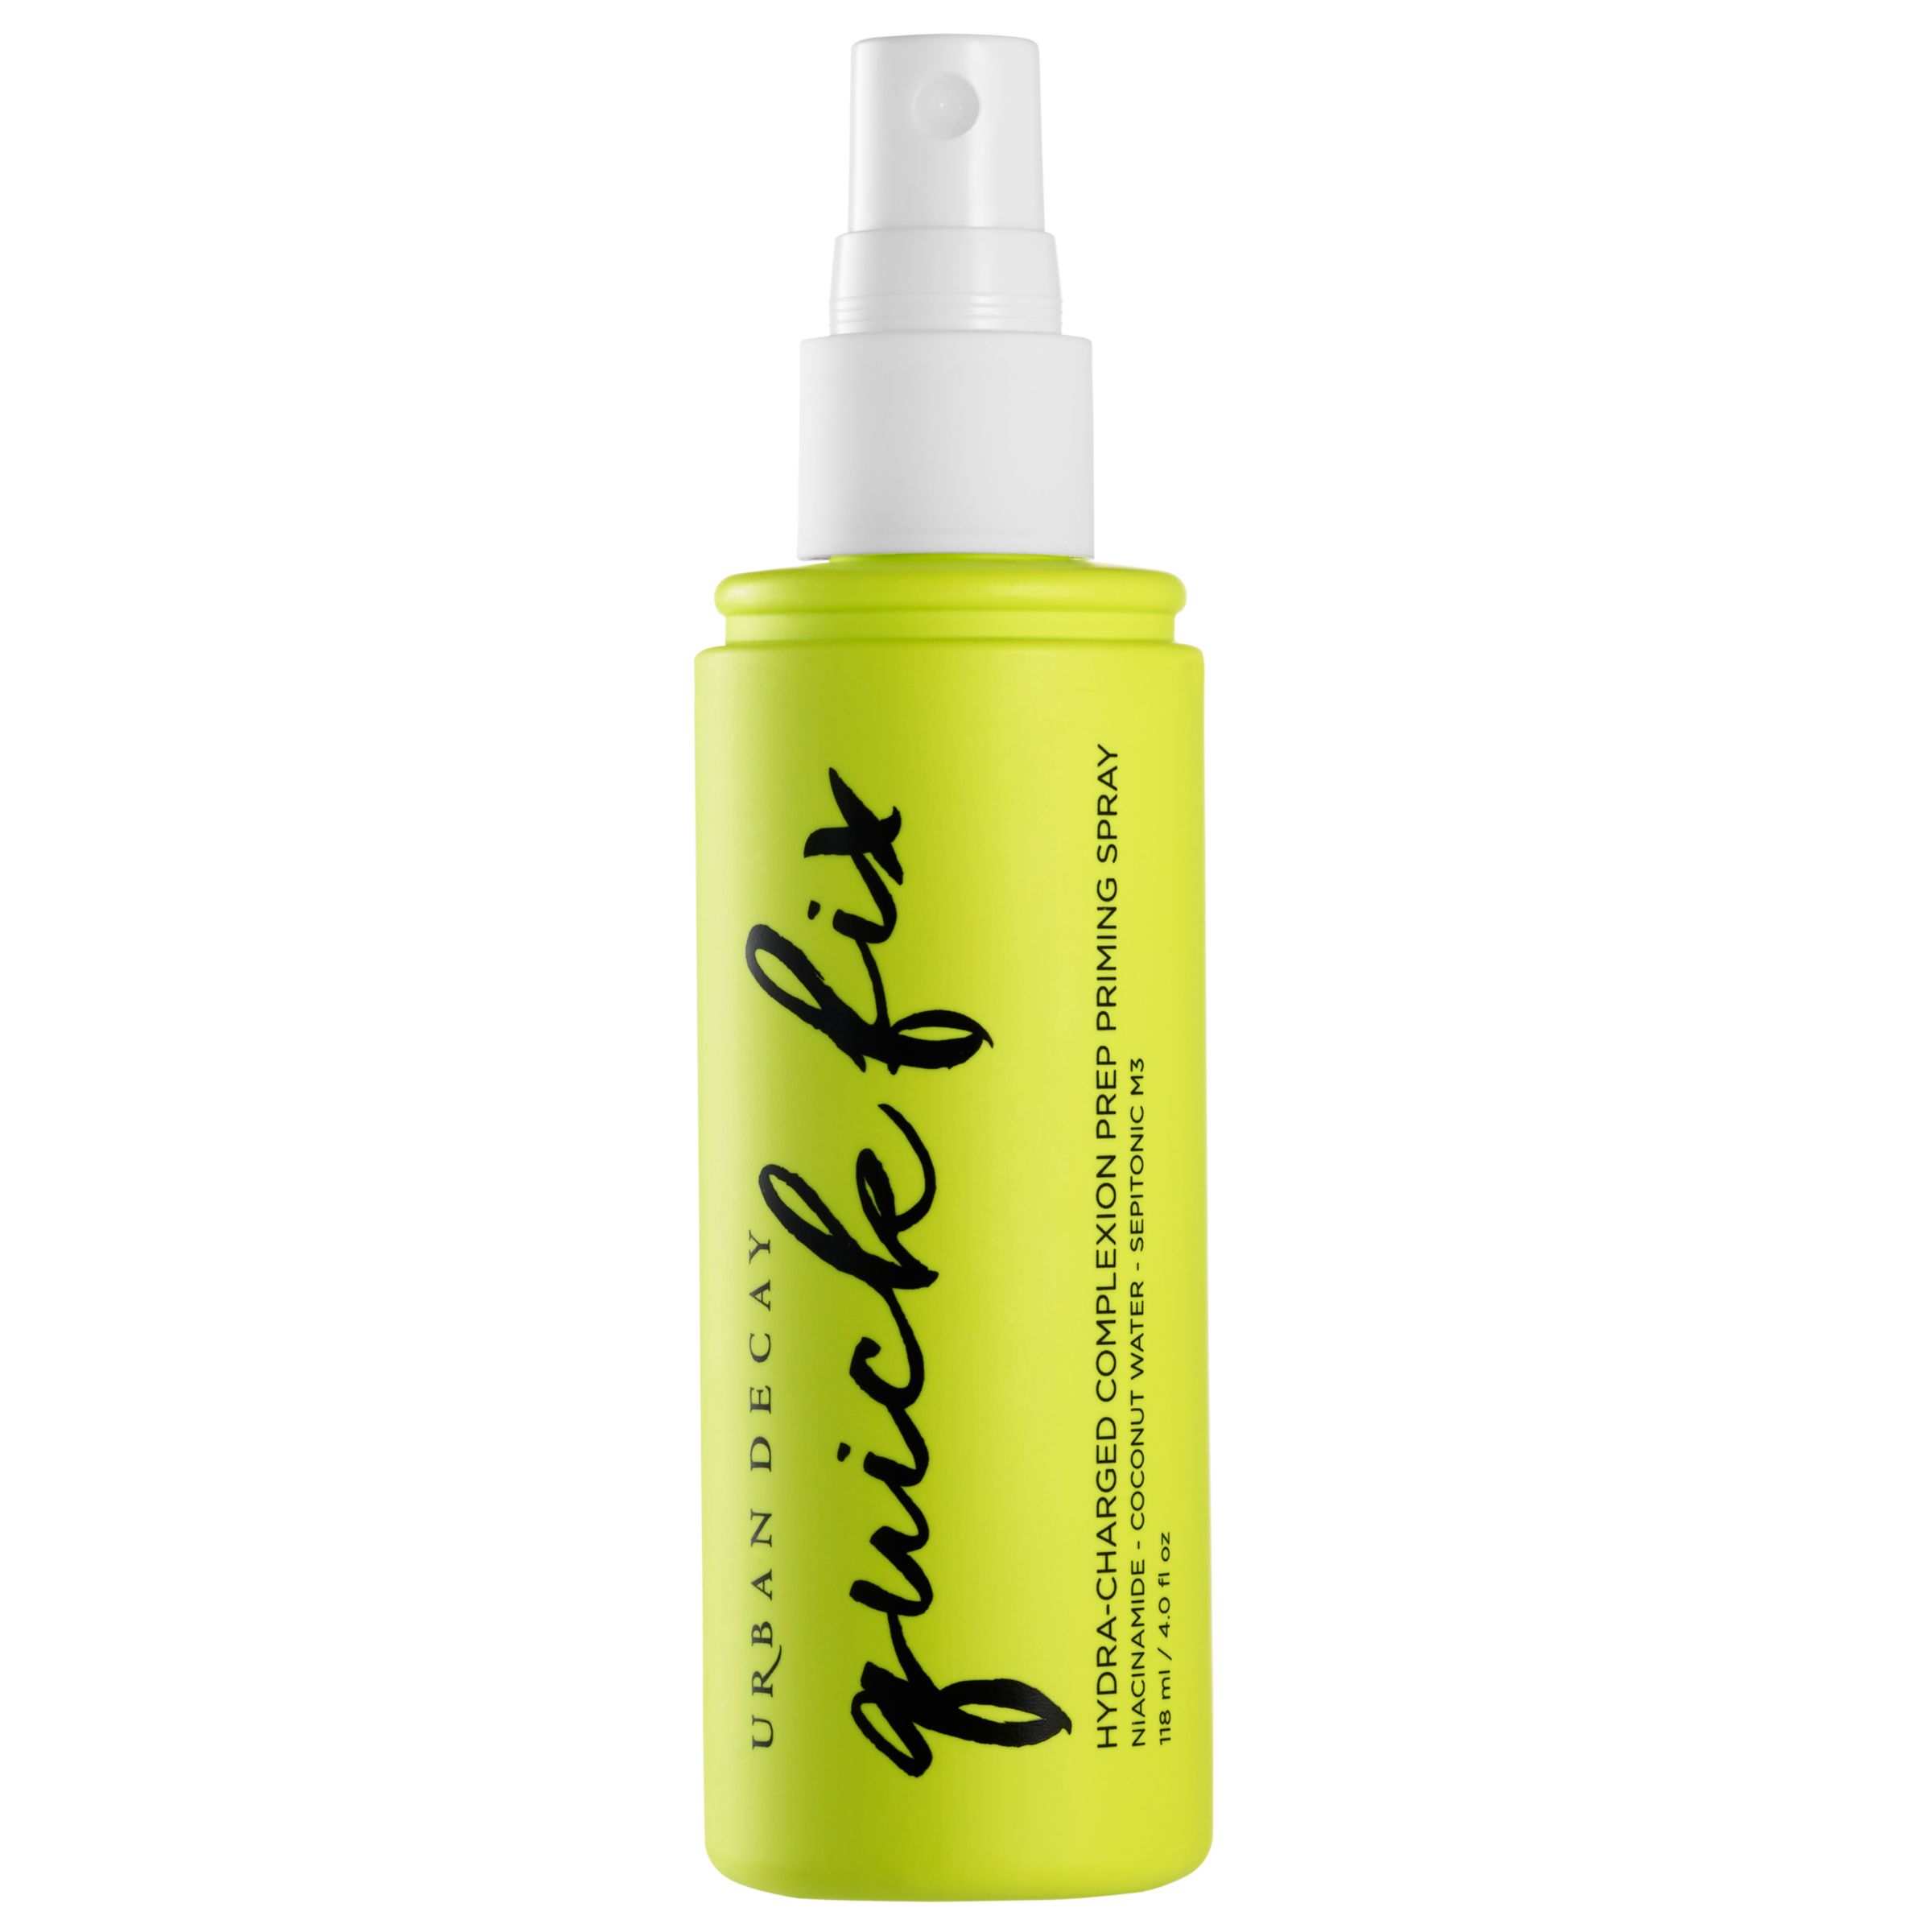 Urban Decay Quick Fix Hydra-Charged Complexion Prep Spray 1